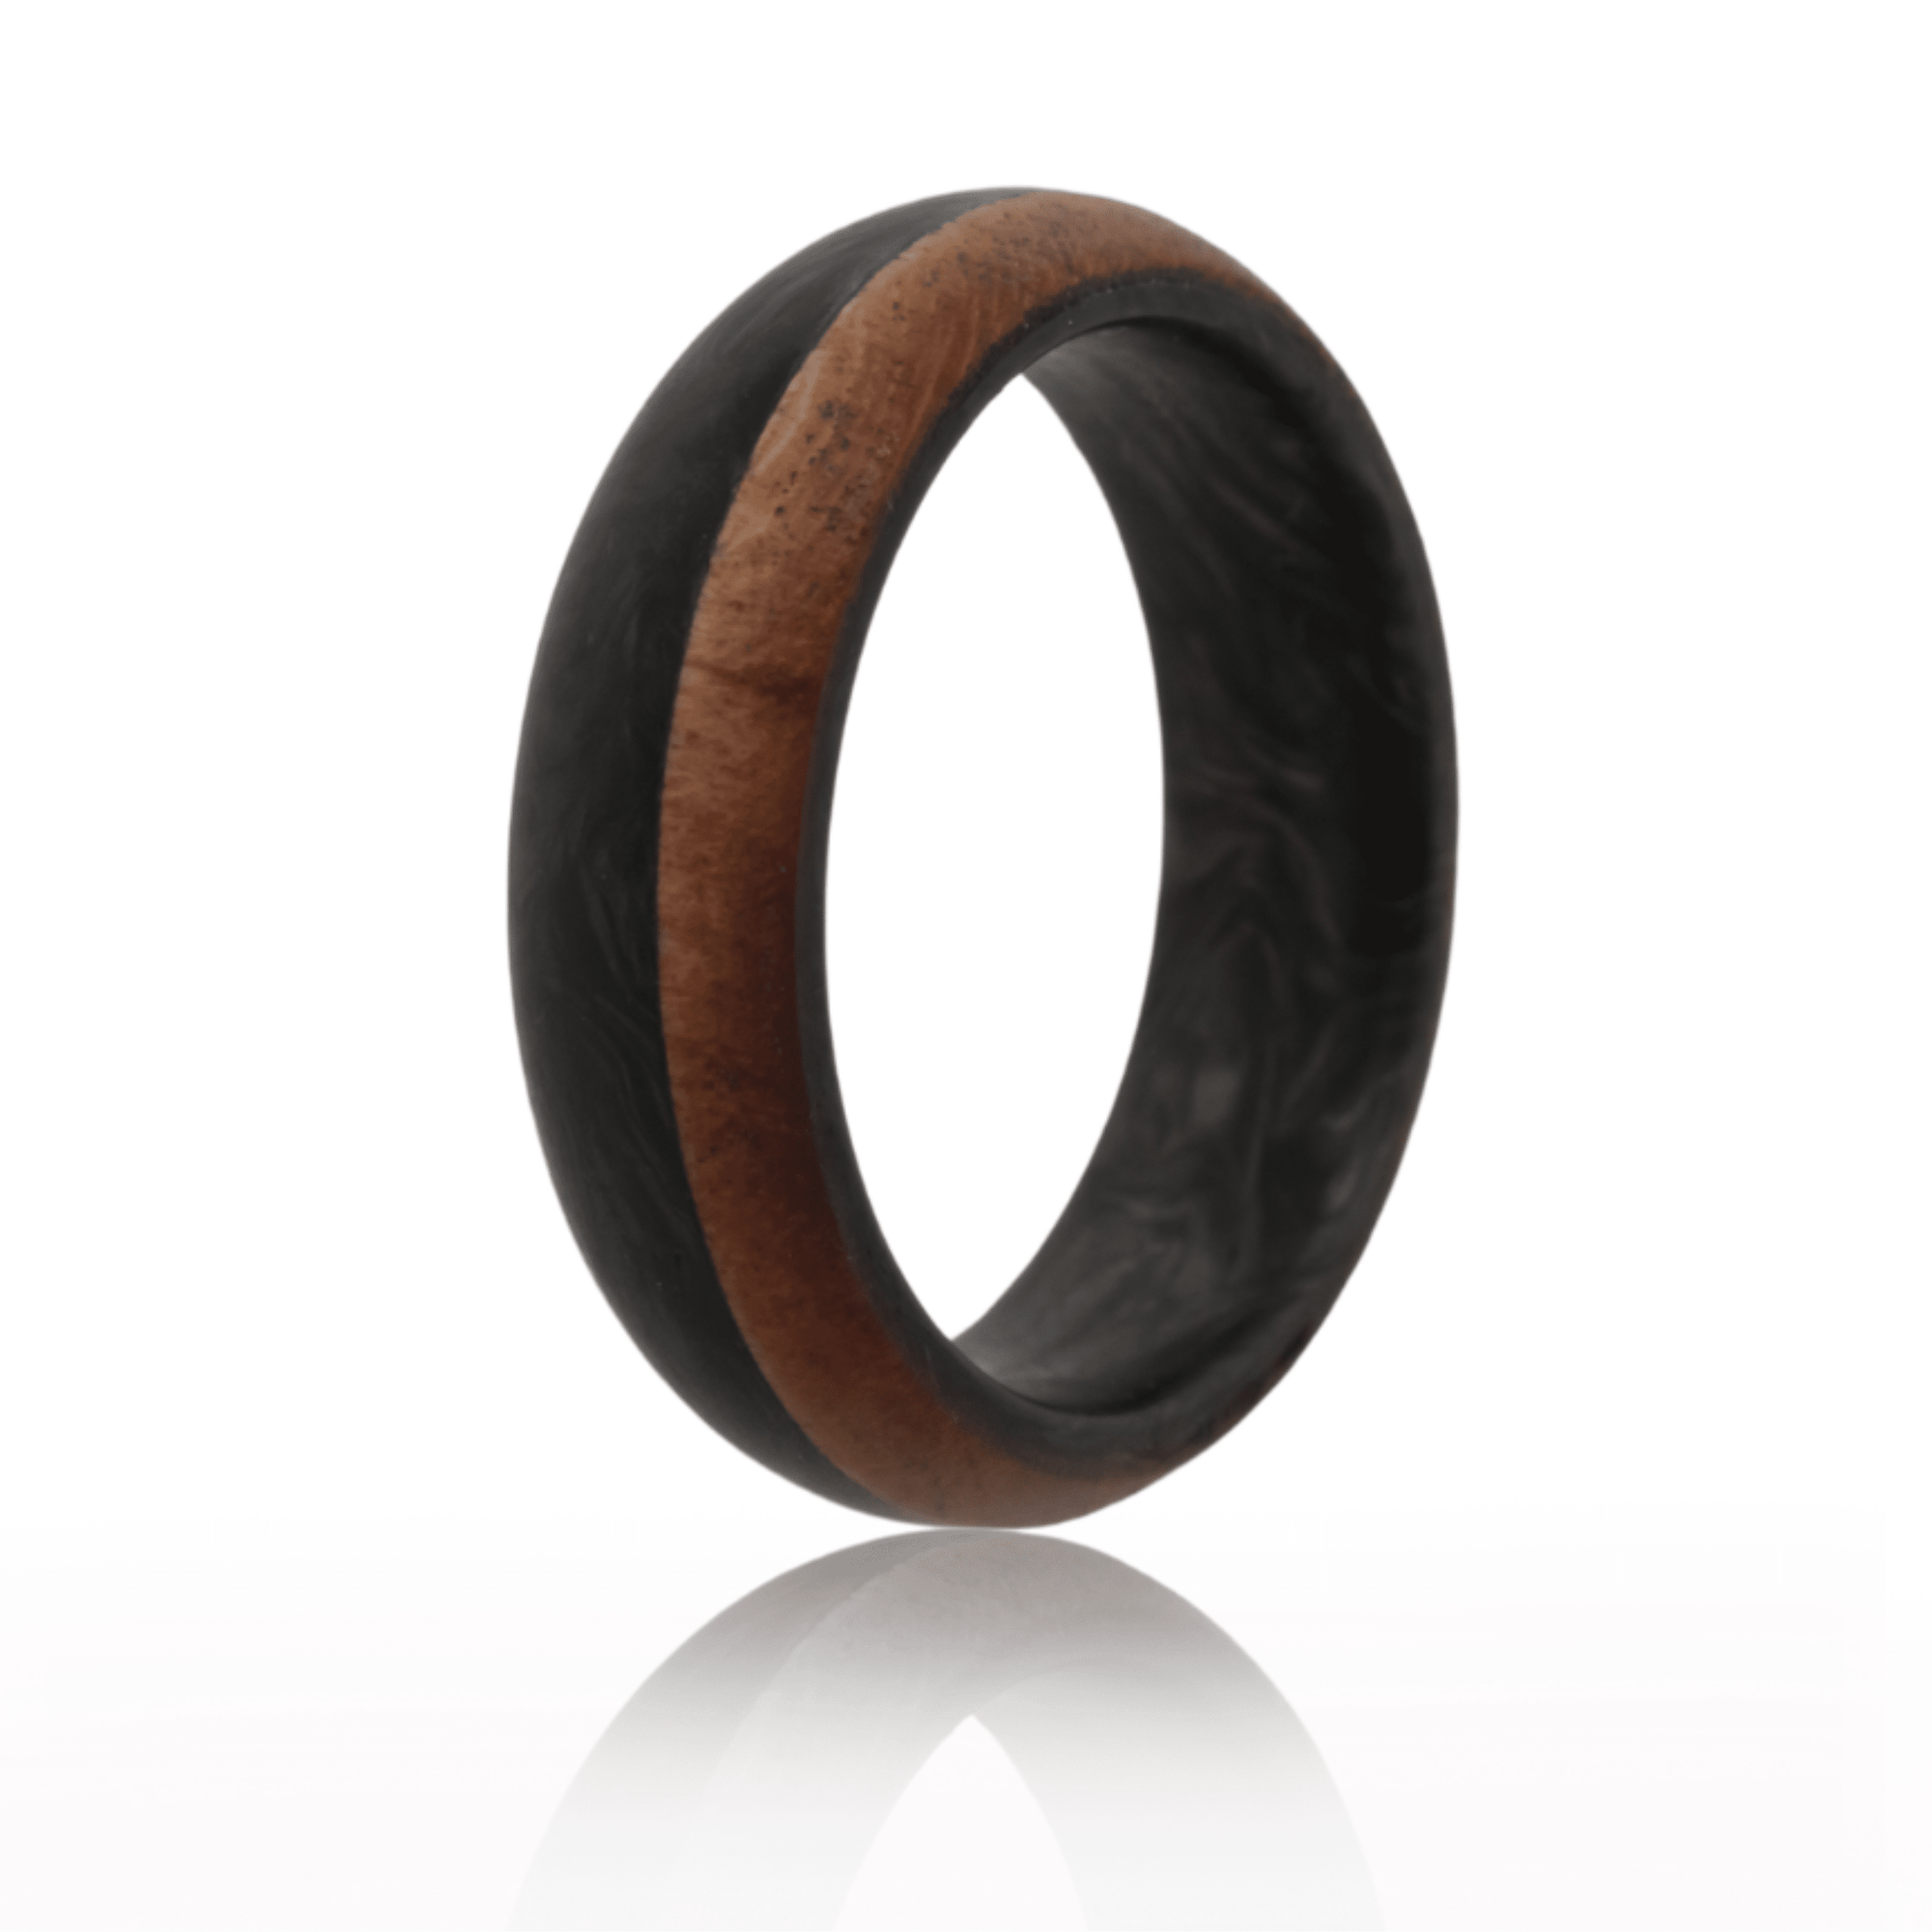 Forged Carbon Fiber Ring with cherry wood rim.